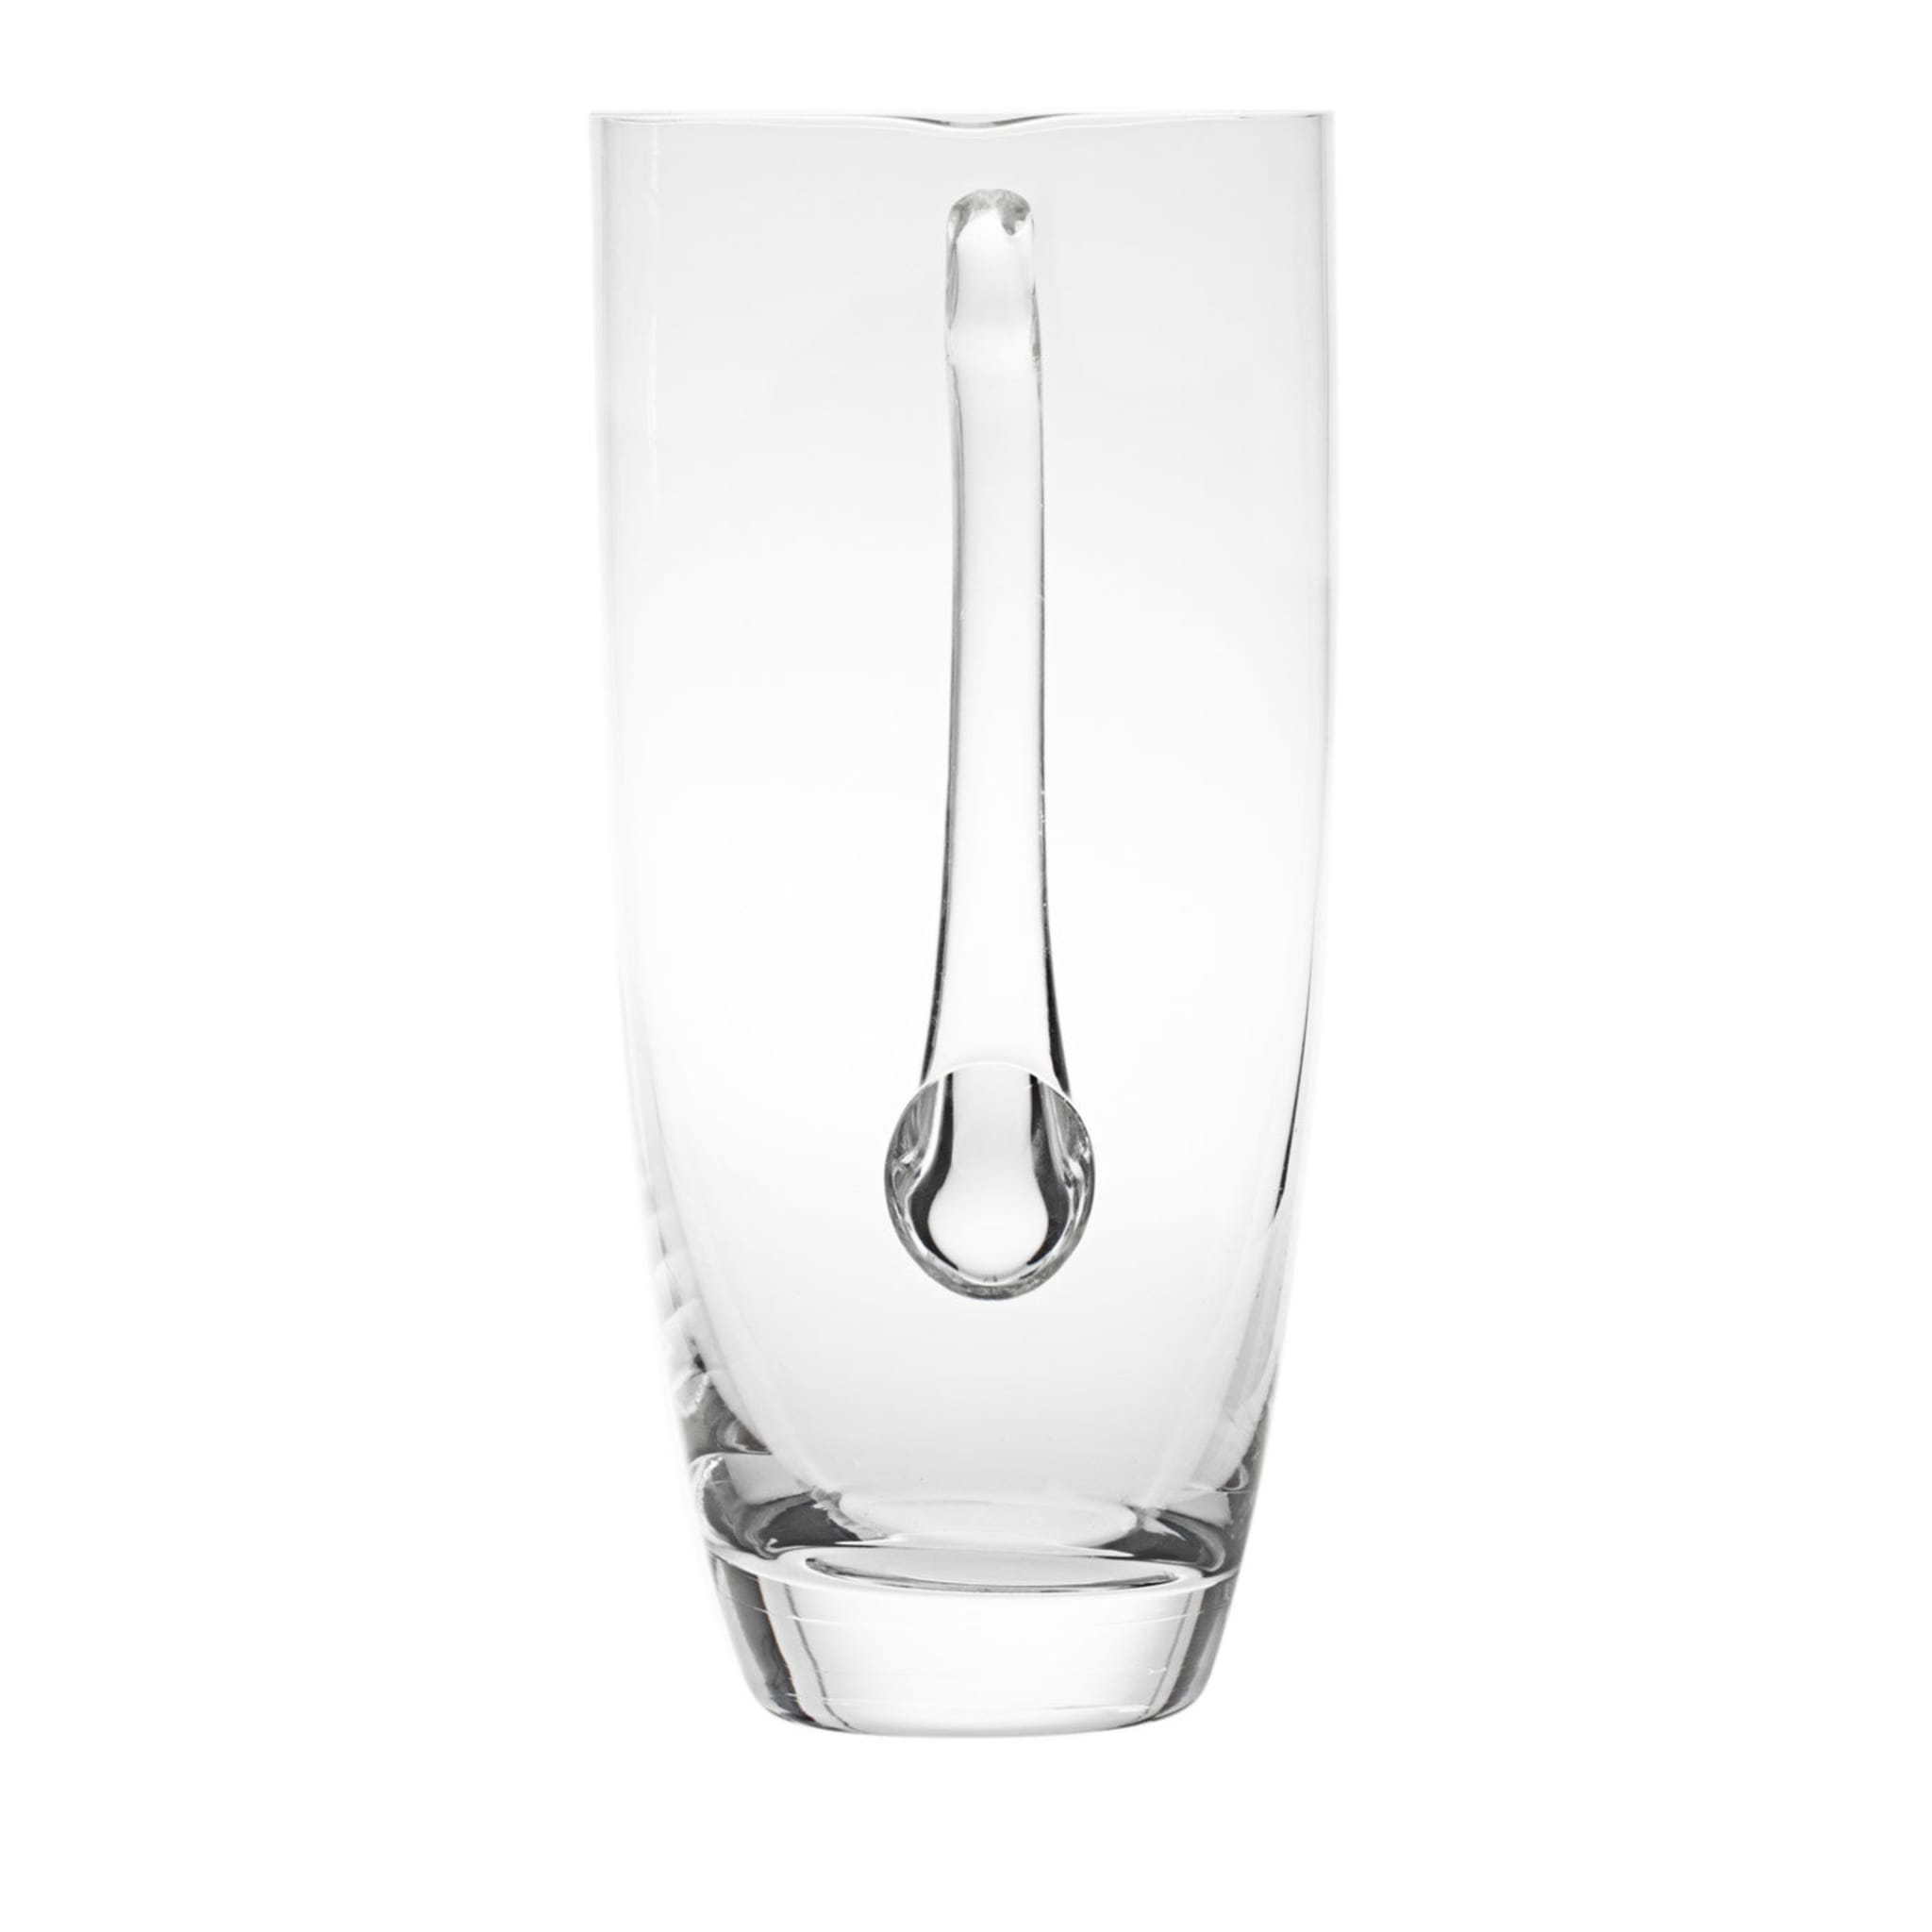 Collier Crystal Pitcher - Alternative view 3